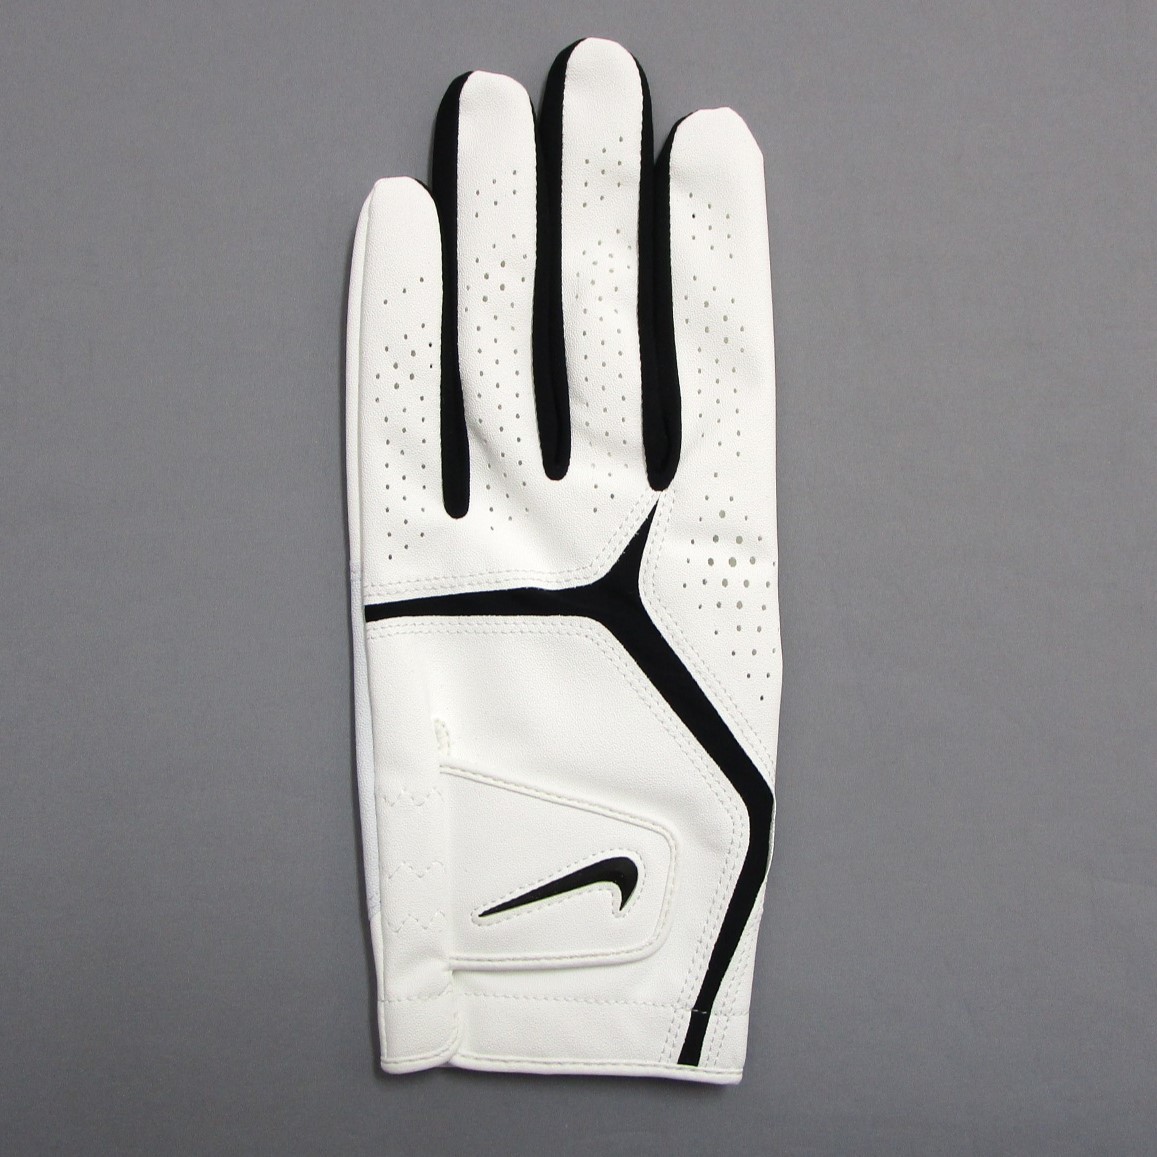 NIKE glove GF1012 L 25cm 3 sheets set left hand for DURA FEELte. rough .-ru Golf white non-standard-sized mail free shipping 